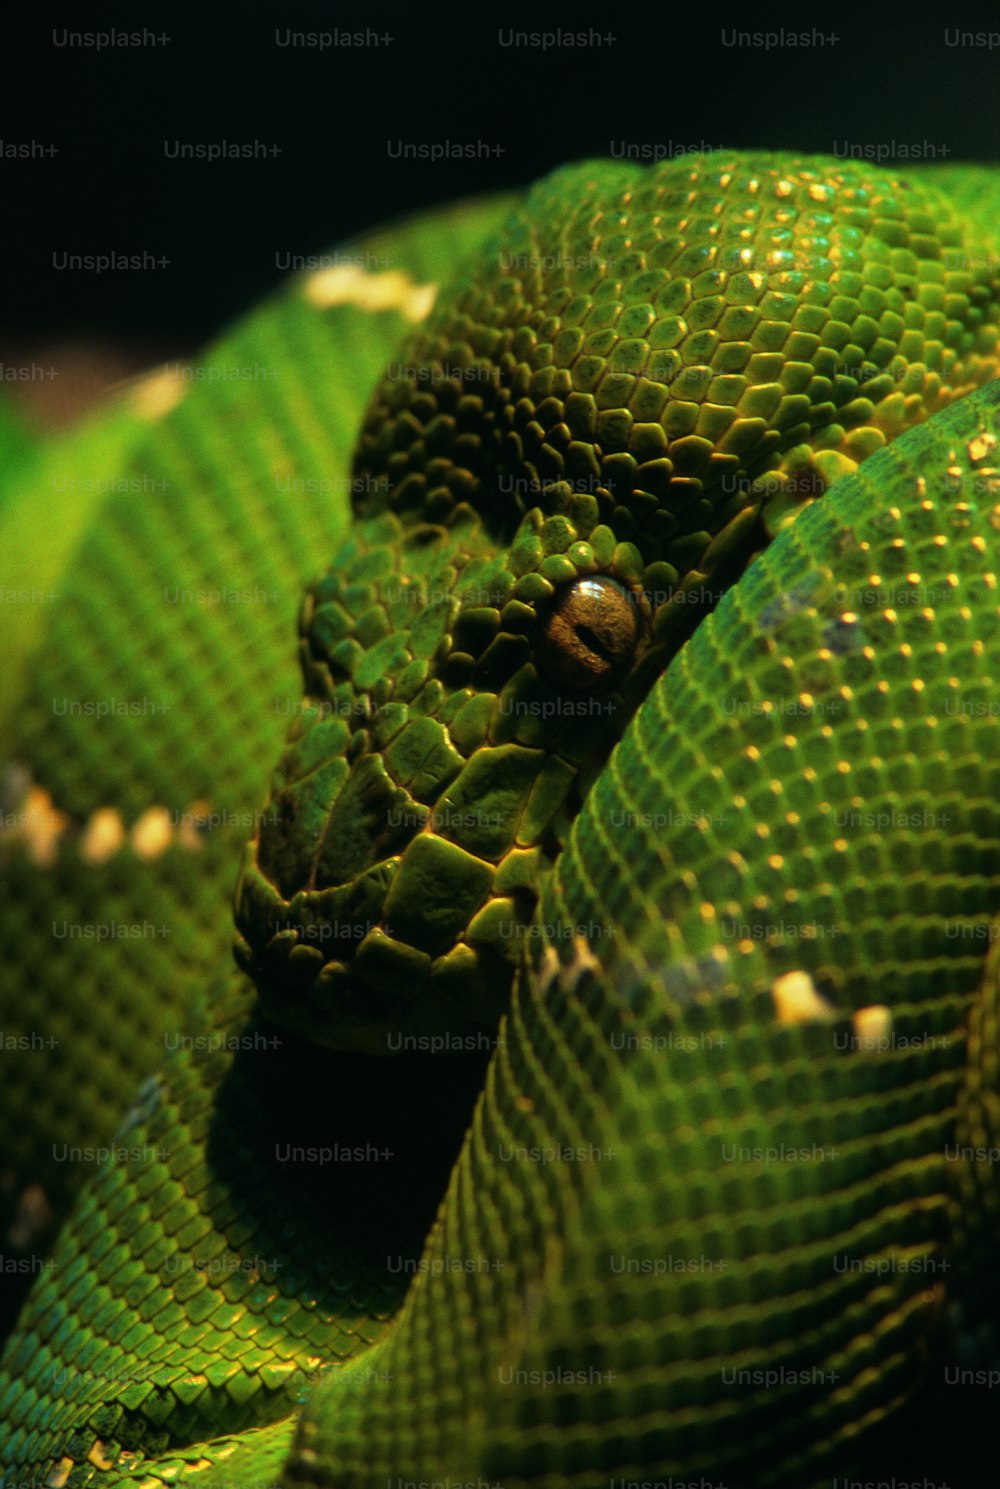 a close up of a green snake's head